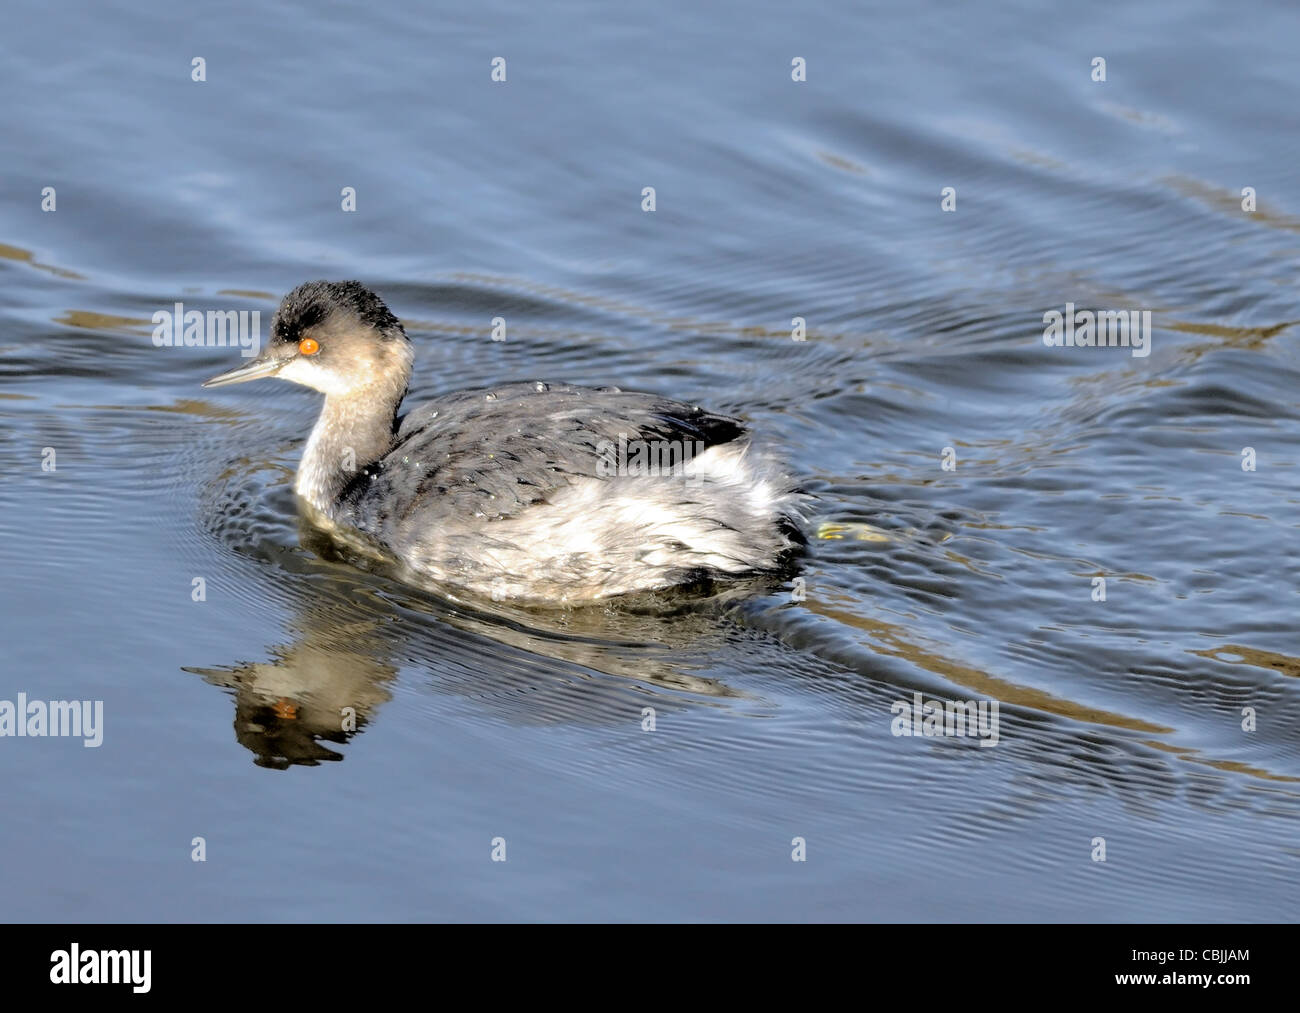 A Eared Grebe  duck (Podiceps nigricollis) seen here on the water. Stock Photo